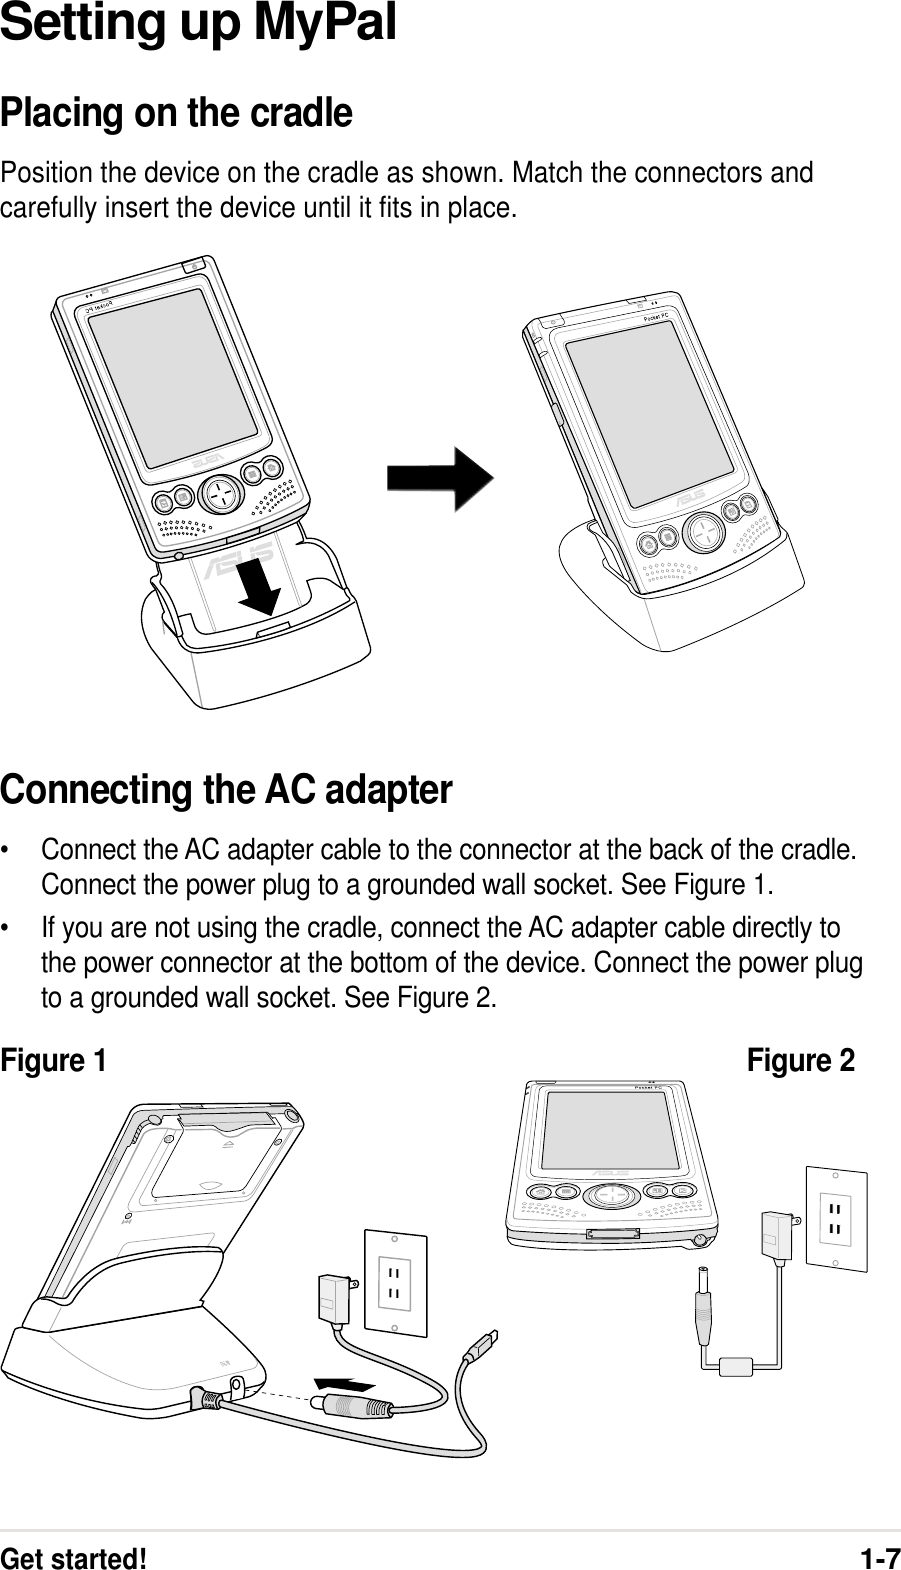 Get started!1-7Setting up MyPalPlacing on the cradlePosition the device on the cradle as shown. Match the connectors andcarefully insert the device until it fits in place.Connecting the AC adapter•Connect the AC adapter cable to the connector at the back of the cradle.Connect the power plug to a grounded wall socket. See Figure 1.•If you are not using the cradle, connect the AC adapter cable directly tothe power connector at the bottom of the device. Connect the power plugto a grounded wall socket. See Figure 2.Figure 1 Figure 2